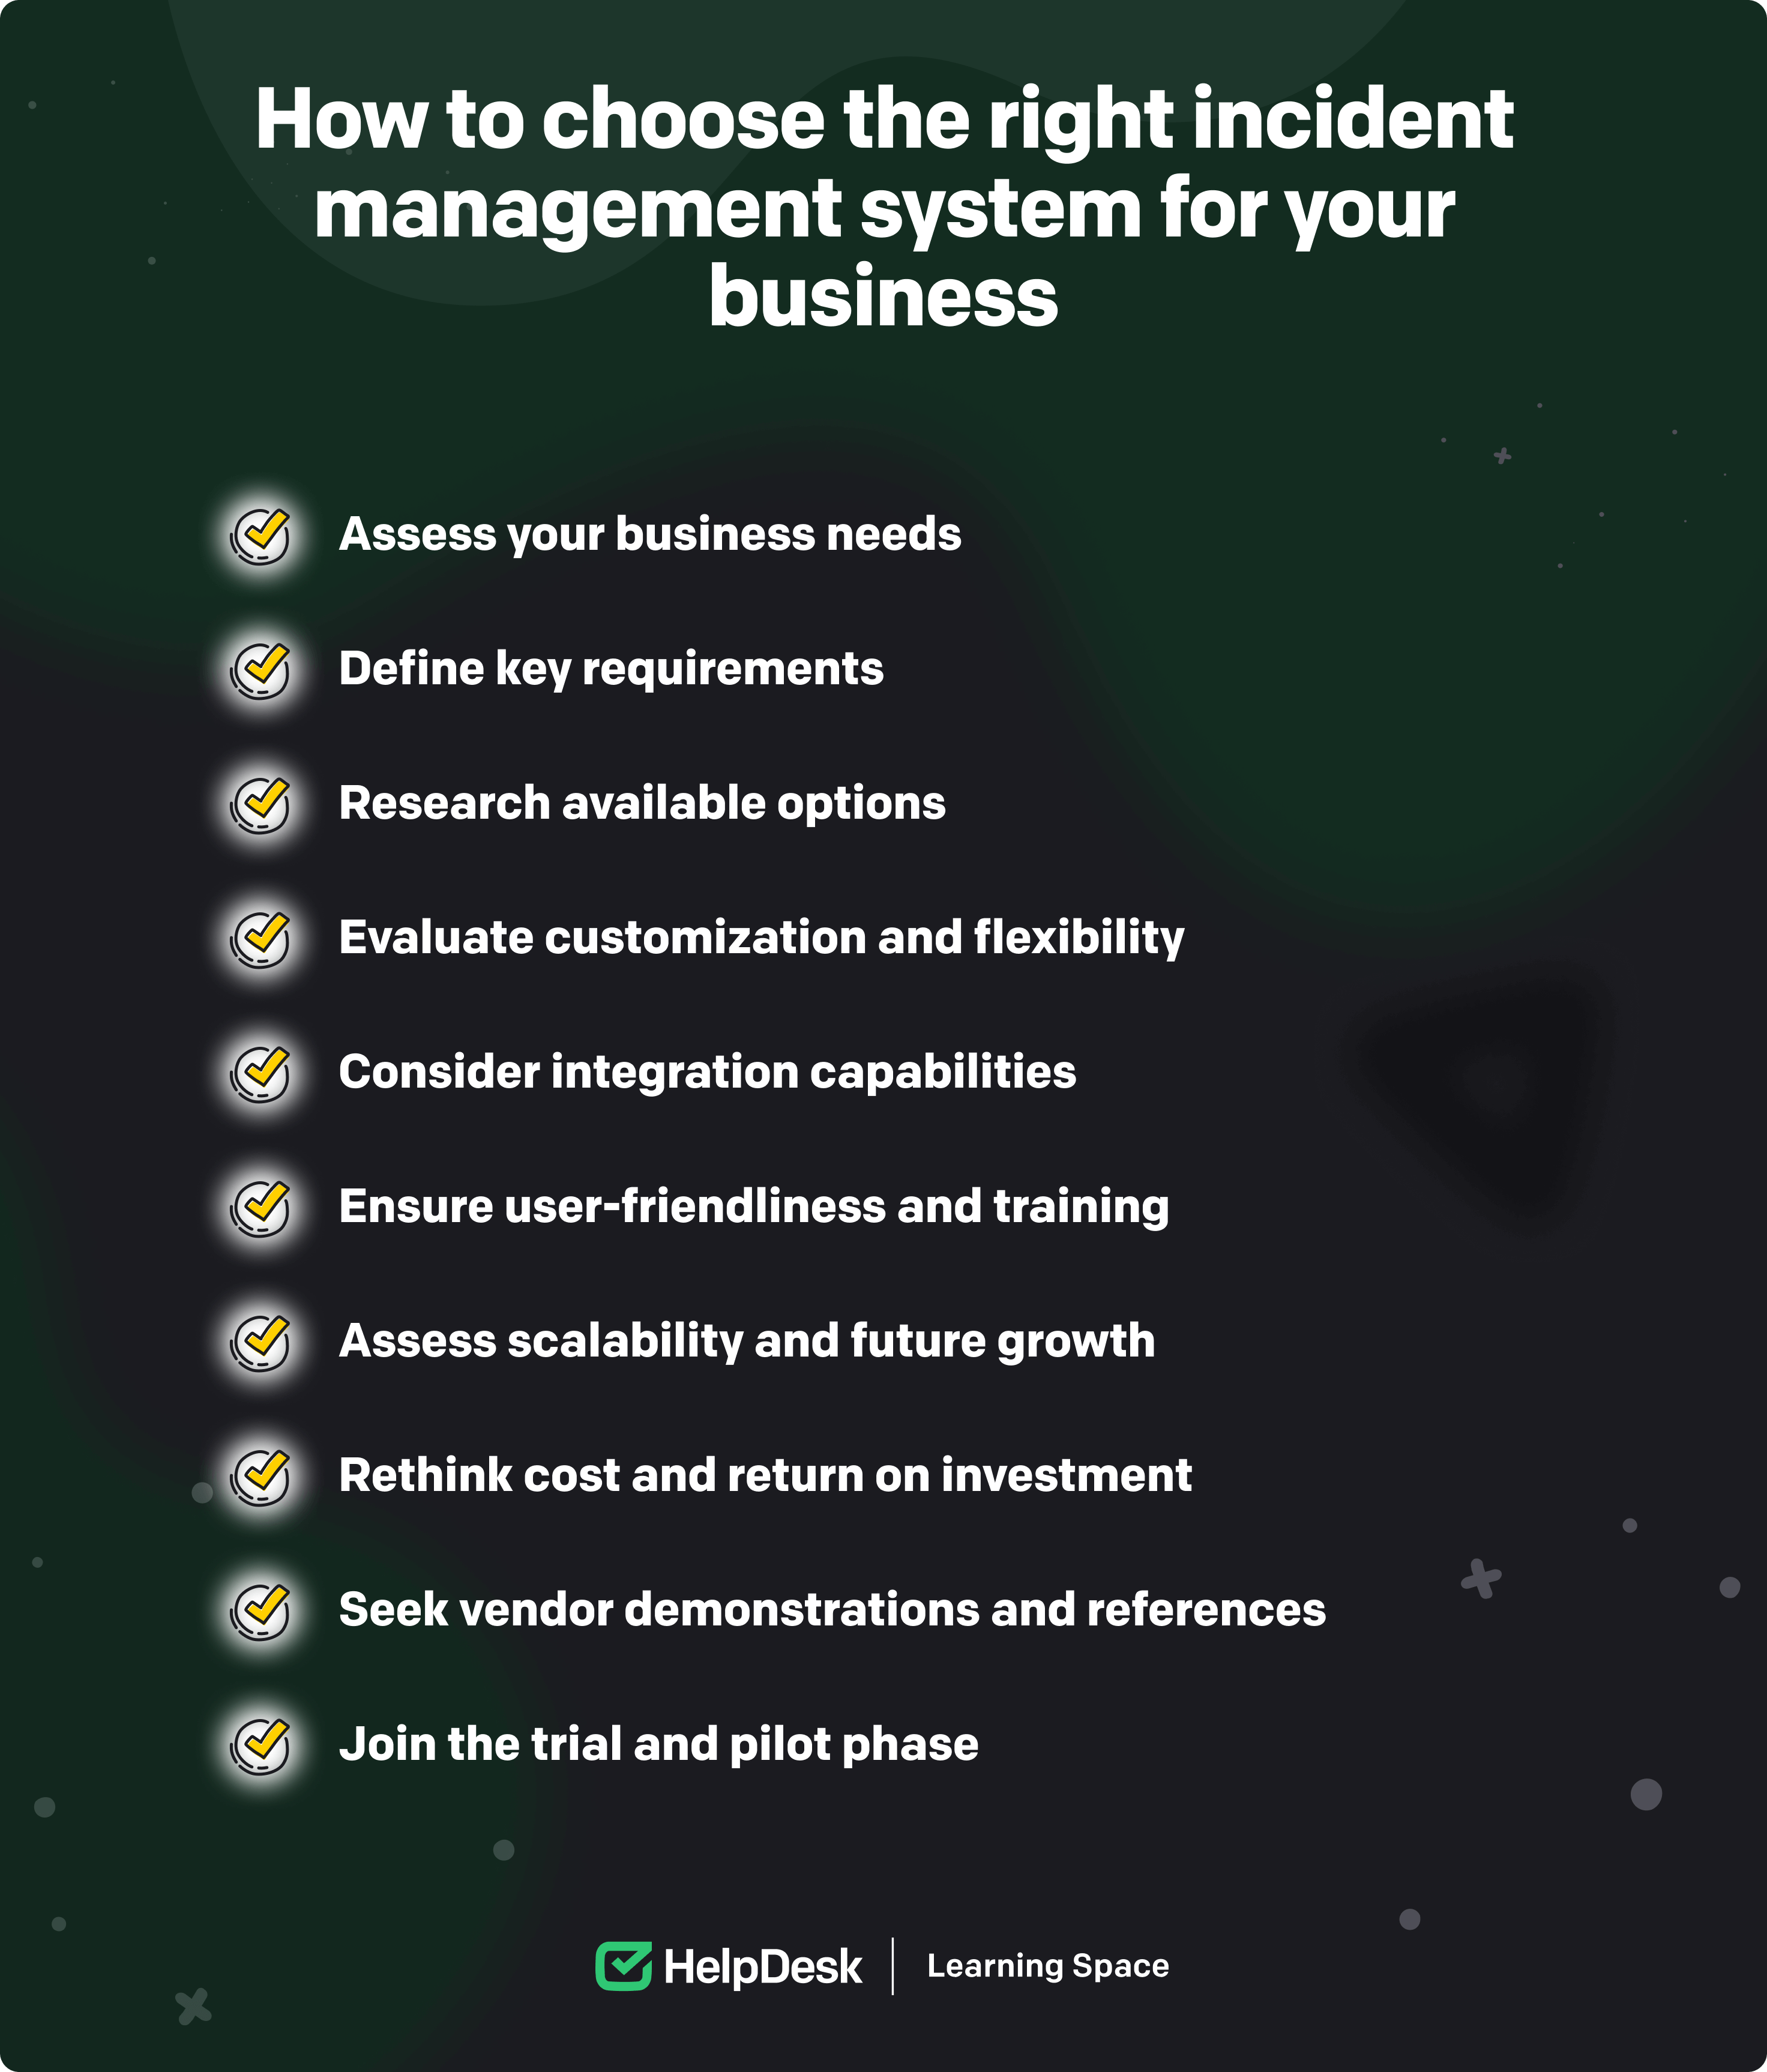 Steps when choosing the right incident management system for your business